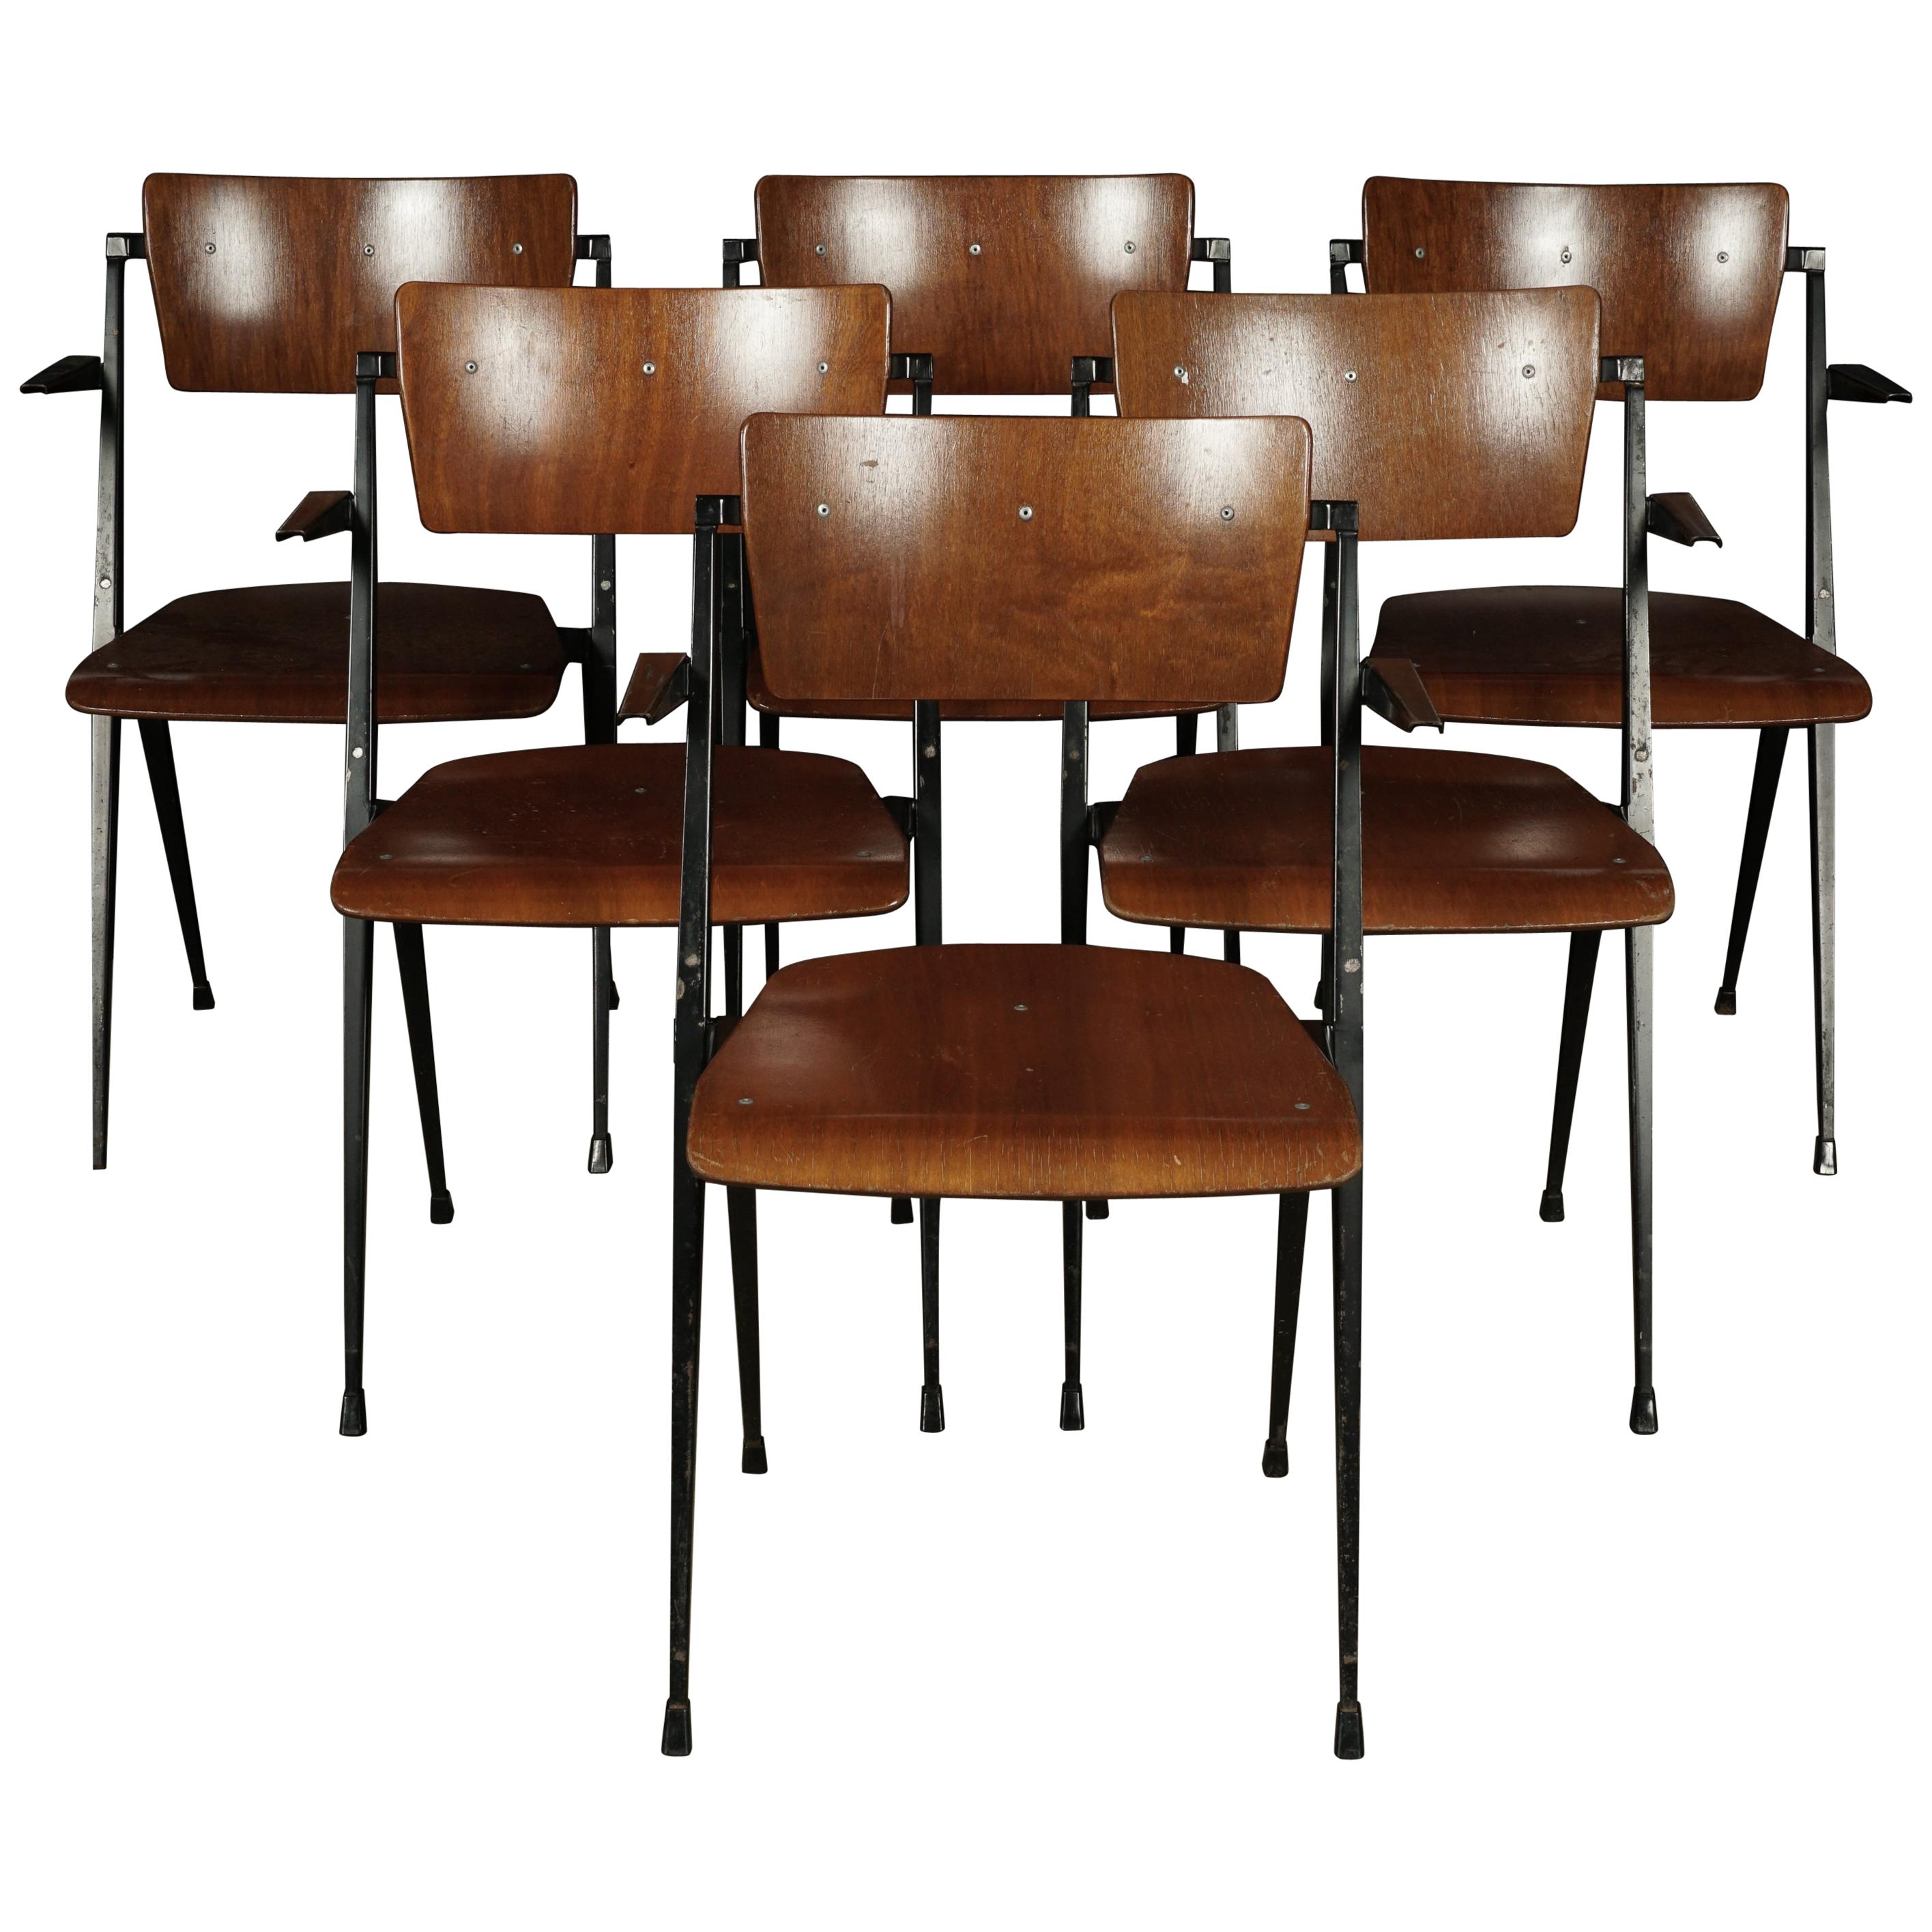 Rare Set of Six Stacking Chairs Designed by Wm. Rietveld, circa 1960